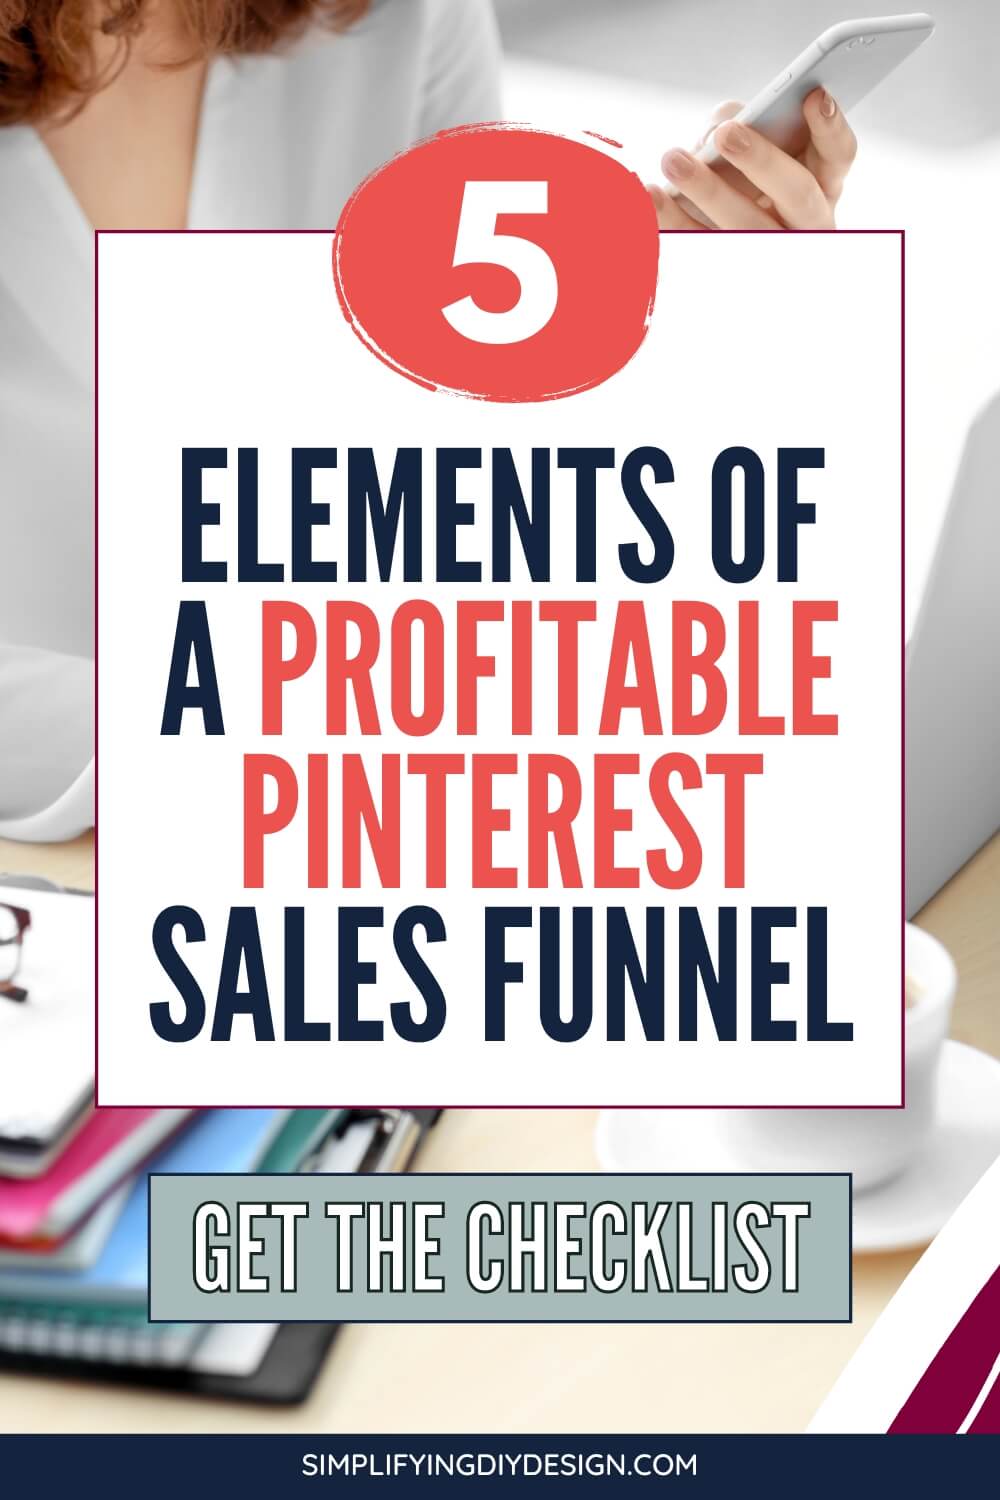 Does your blog make money with Pinterest? Here are 5 must-haves to get your Pinterest sales funnel in order to make money blogging and generate passive income!